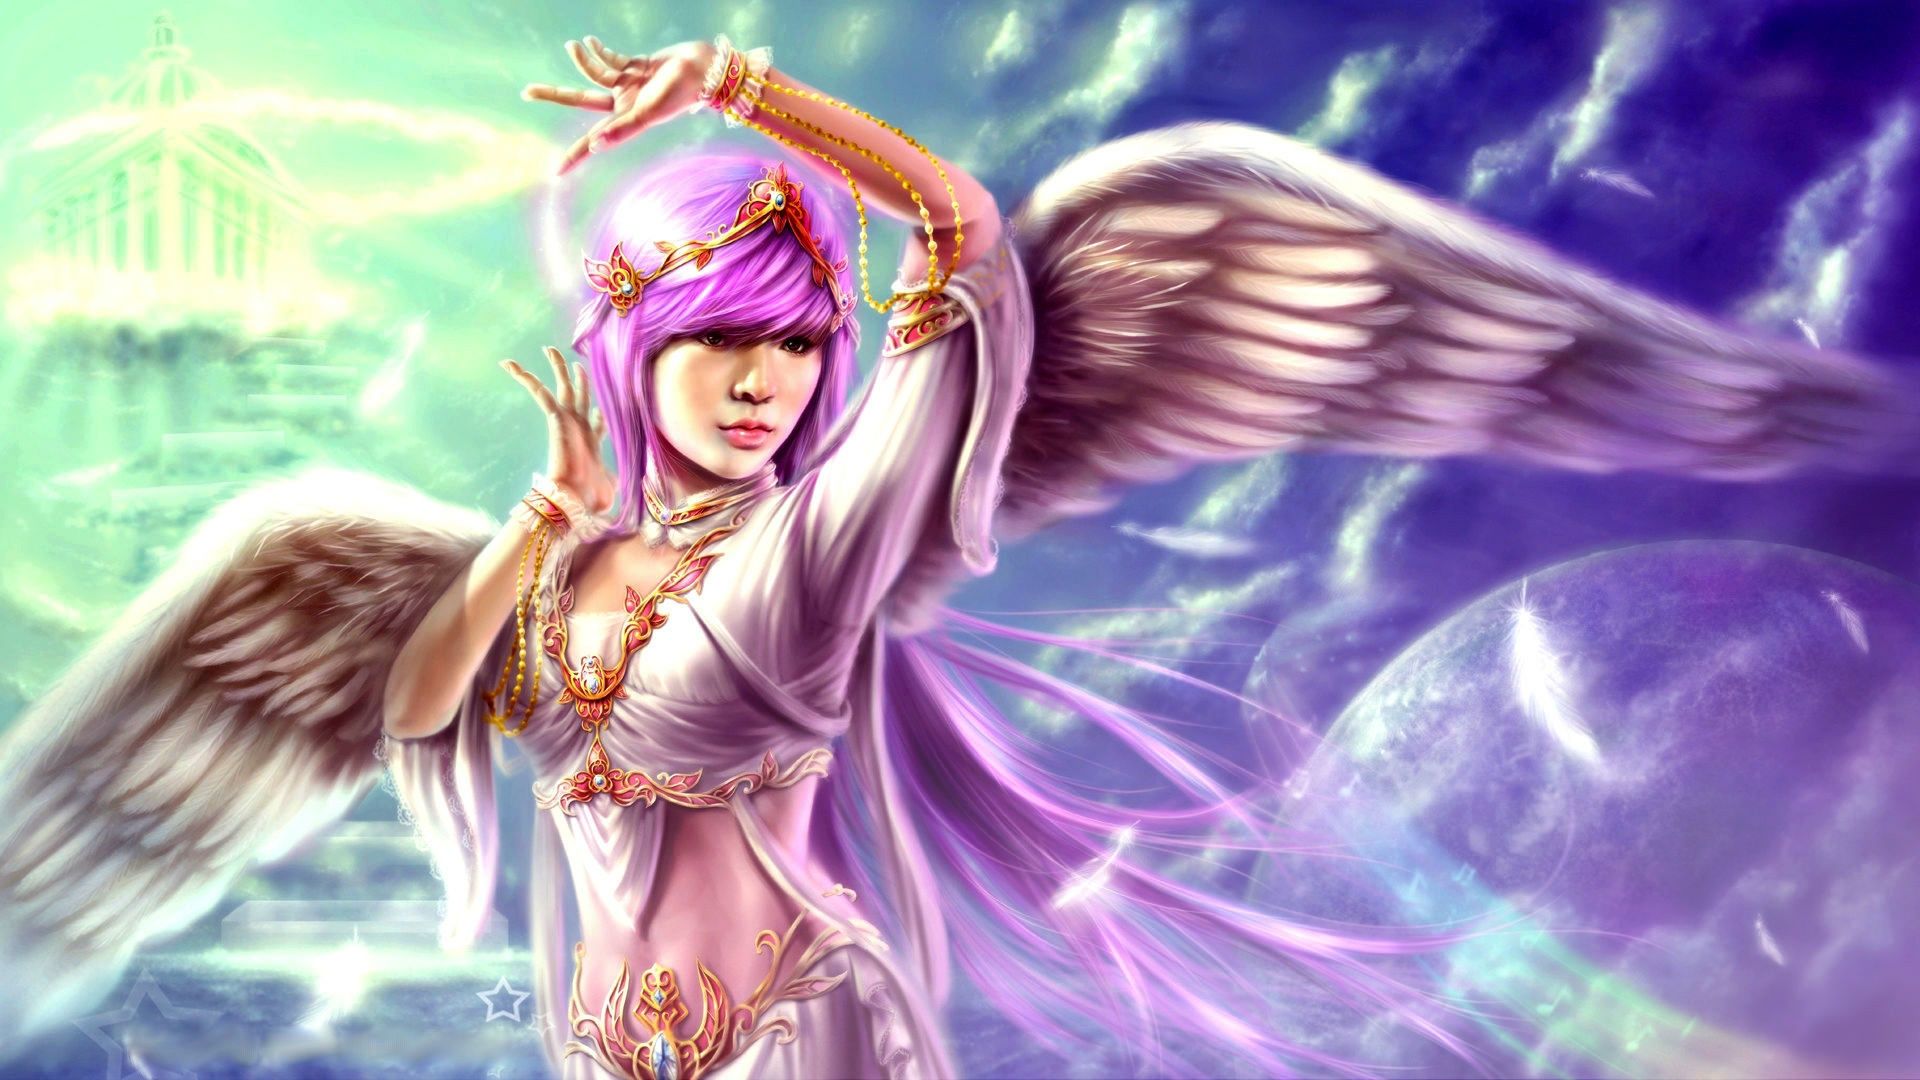 Wallpaper Purple hair fantasy angel girl, wings feather 1920x1080 Full HD 2K Picture, Image